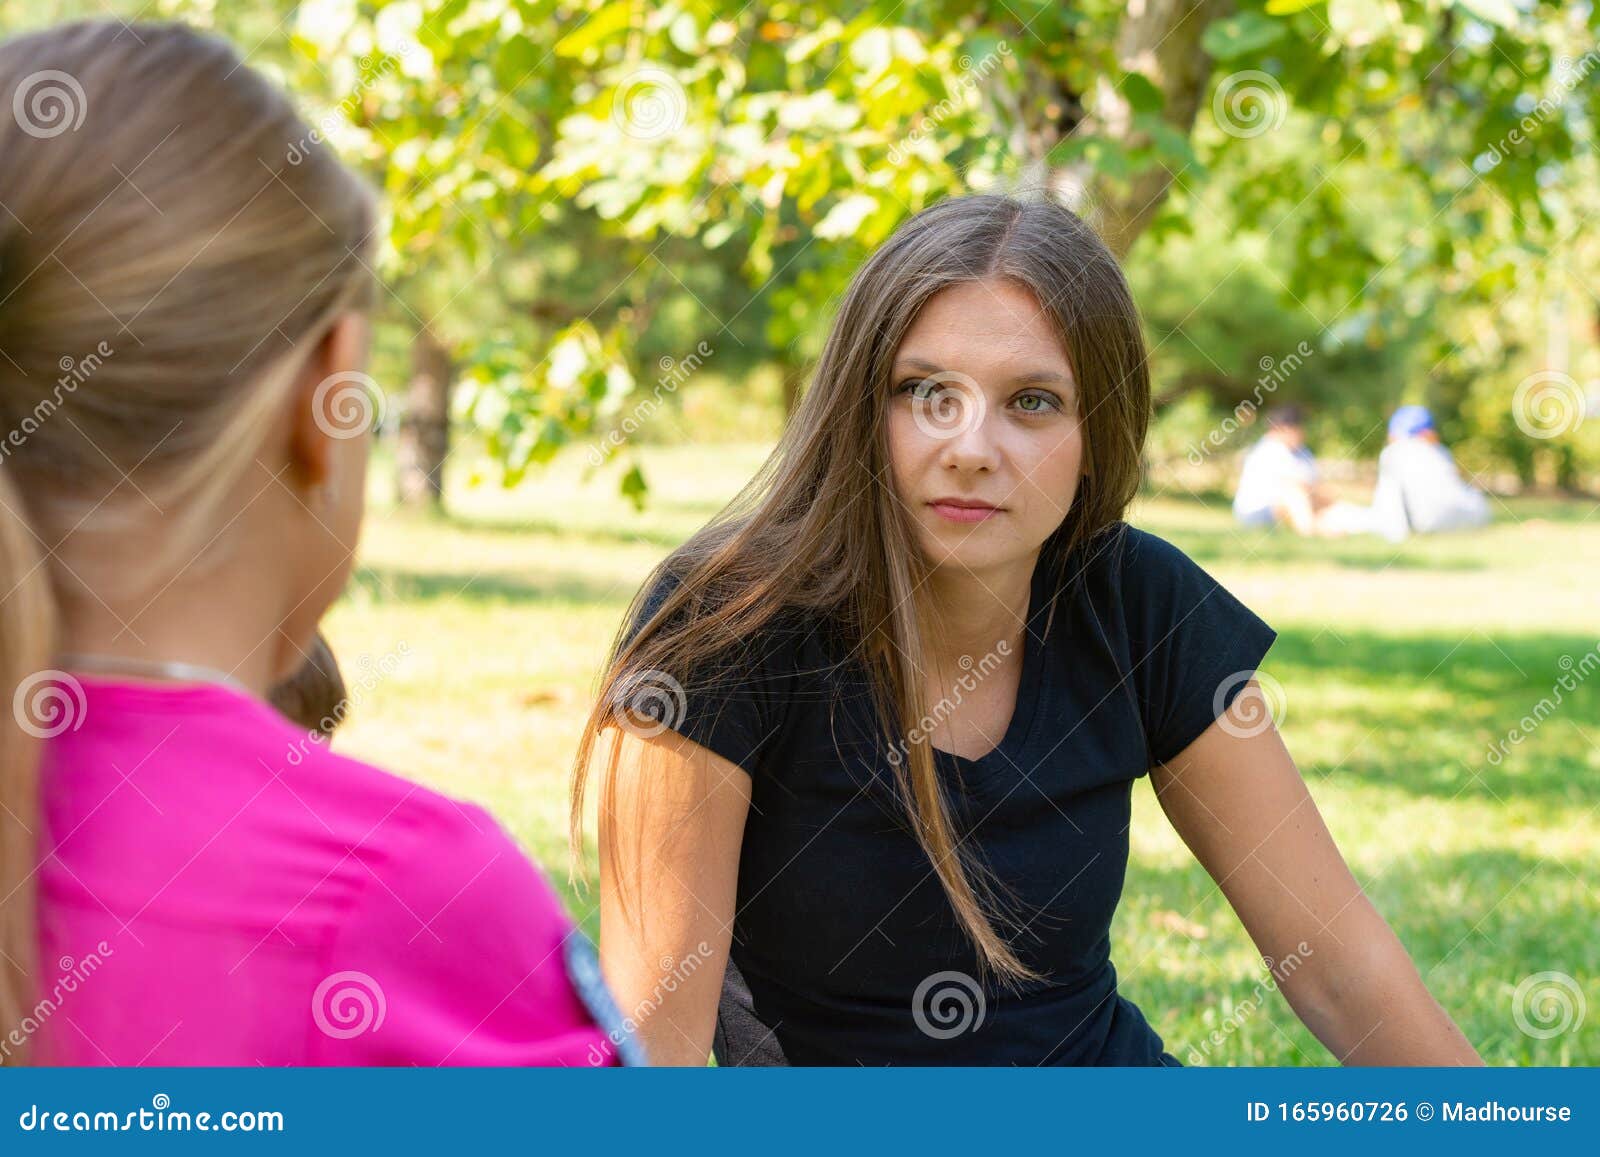 the girl on a picnic listens attentively to the interlocutor